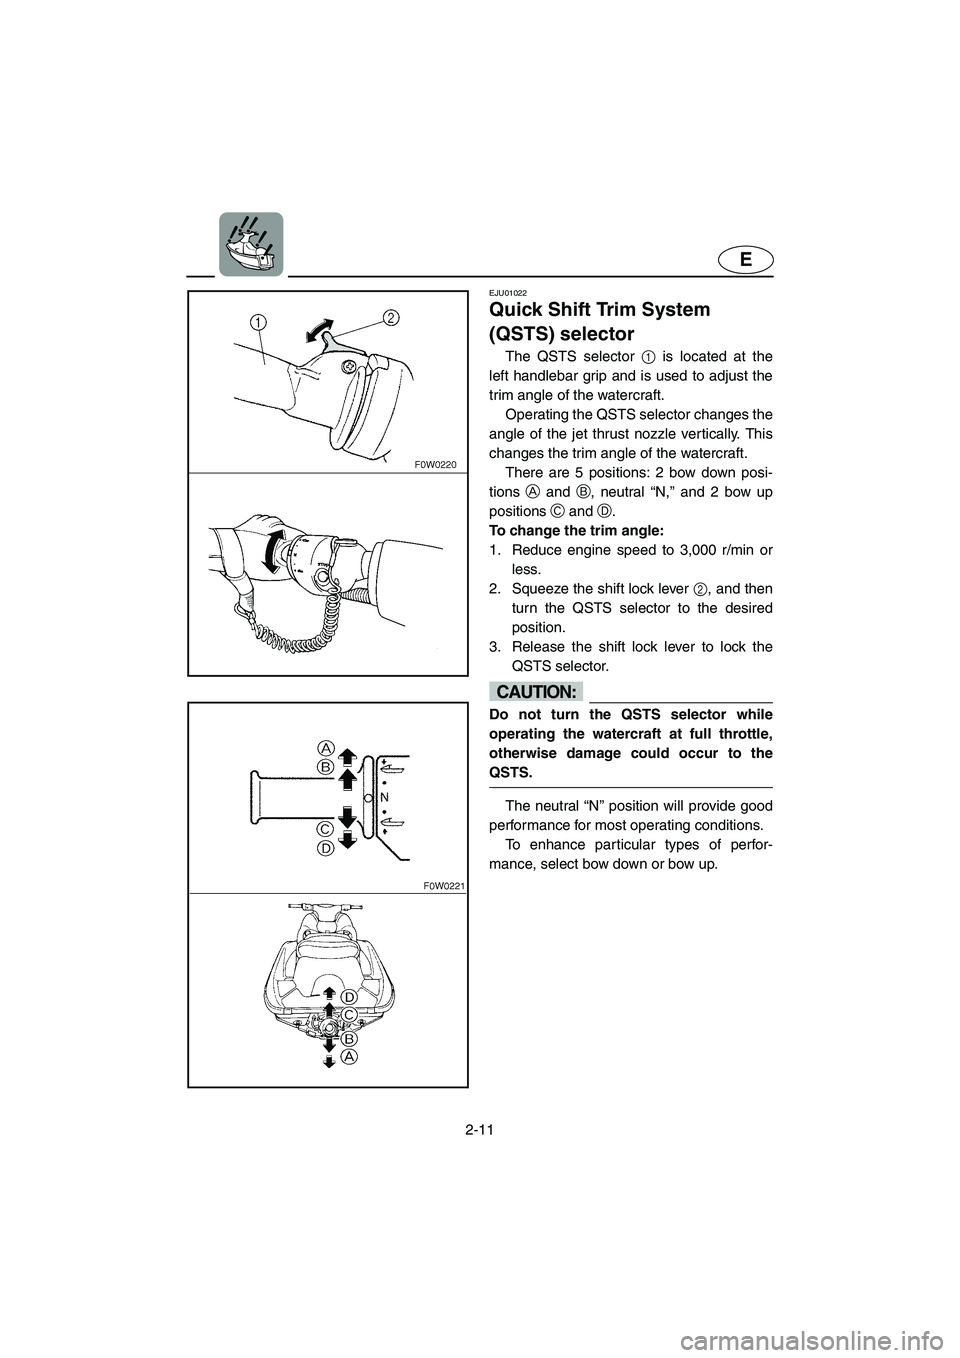 YAMAHA GP800R 2003 Owners Guide 2-11
E
EJU01022
Quick Shift Trim System 
(QSTS) selector 
The QSTS selector 1 is located at the
left handlebar grip and is used to adjust the
trim angle of the watercraft. 
Operating the QSTS selector